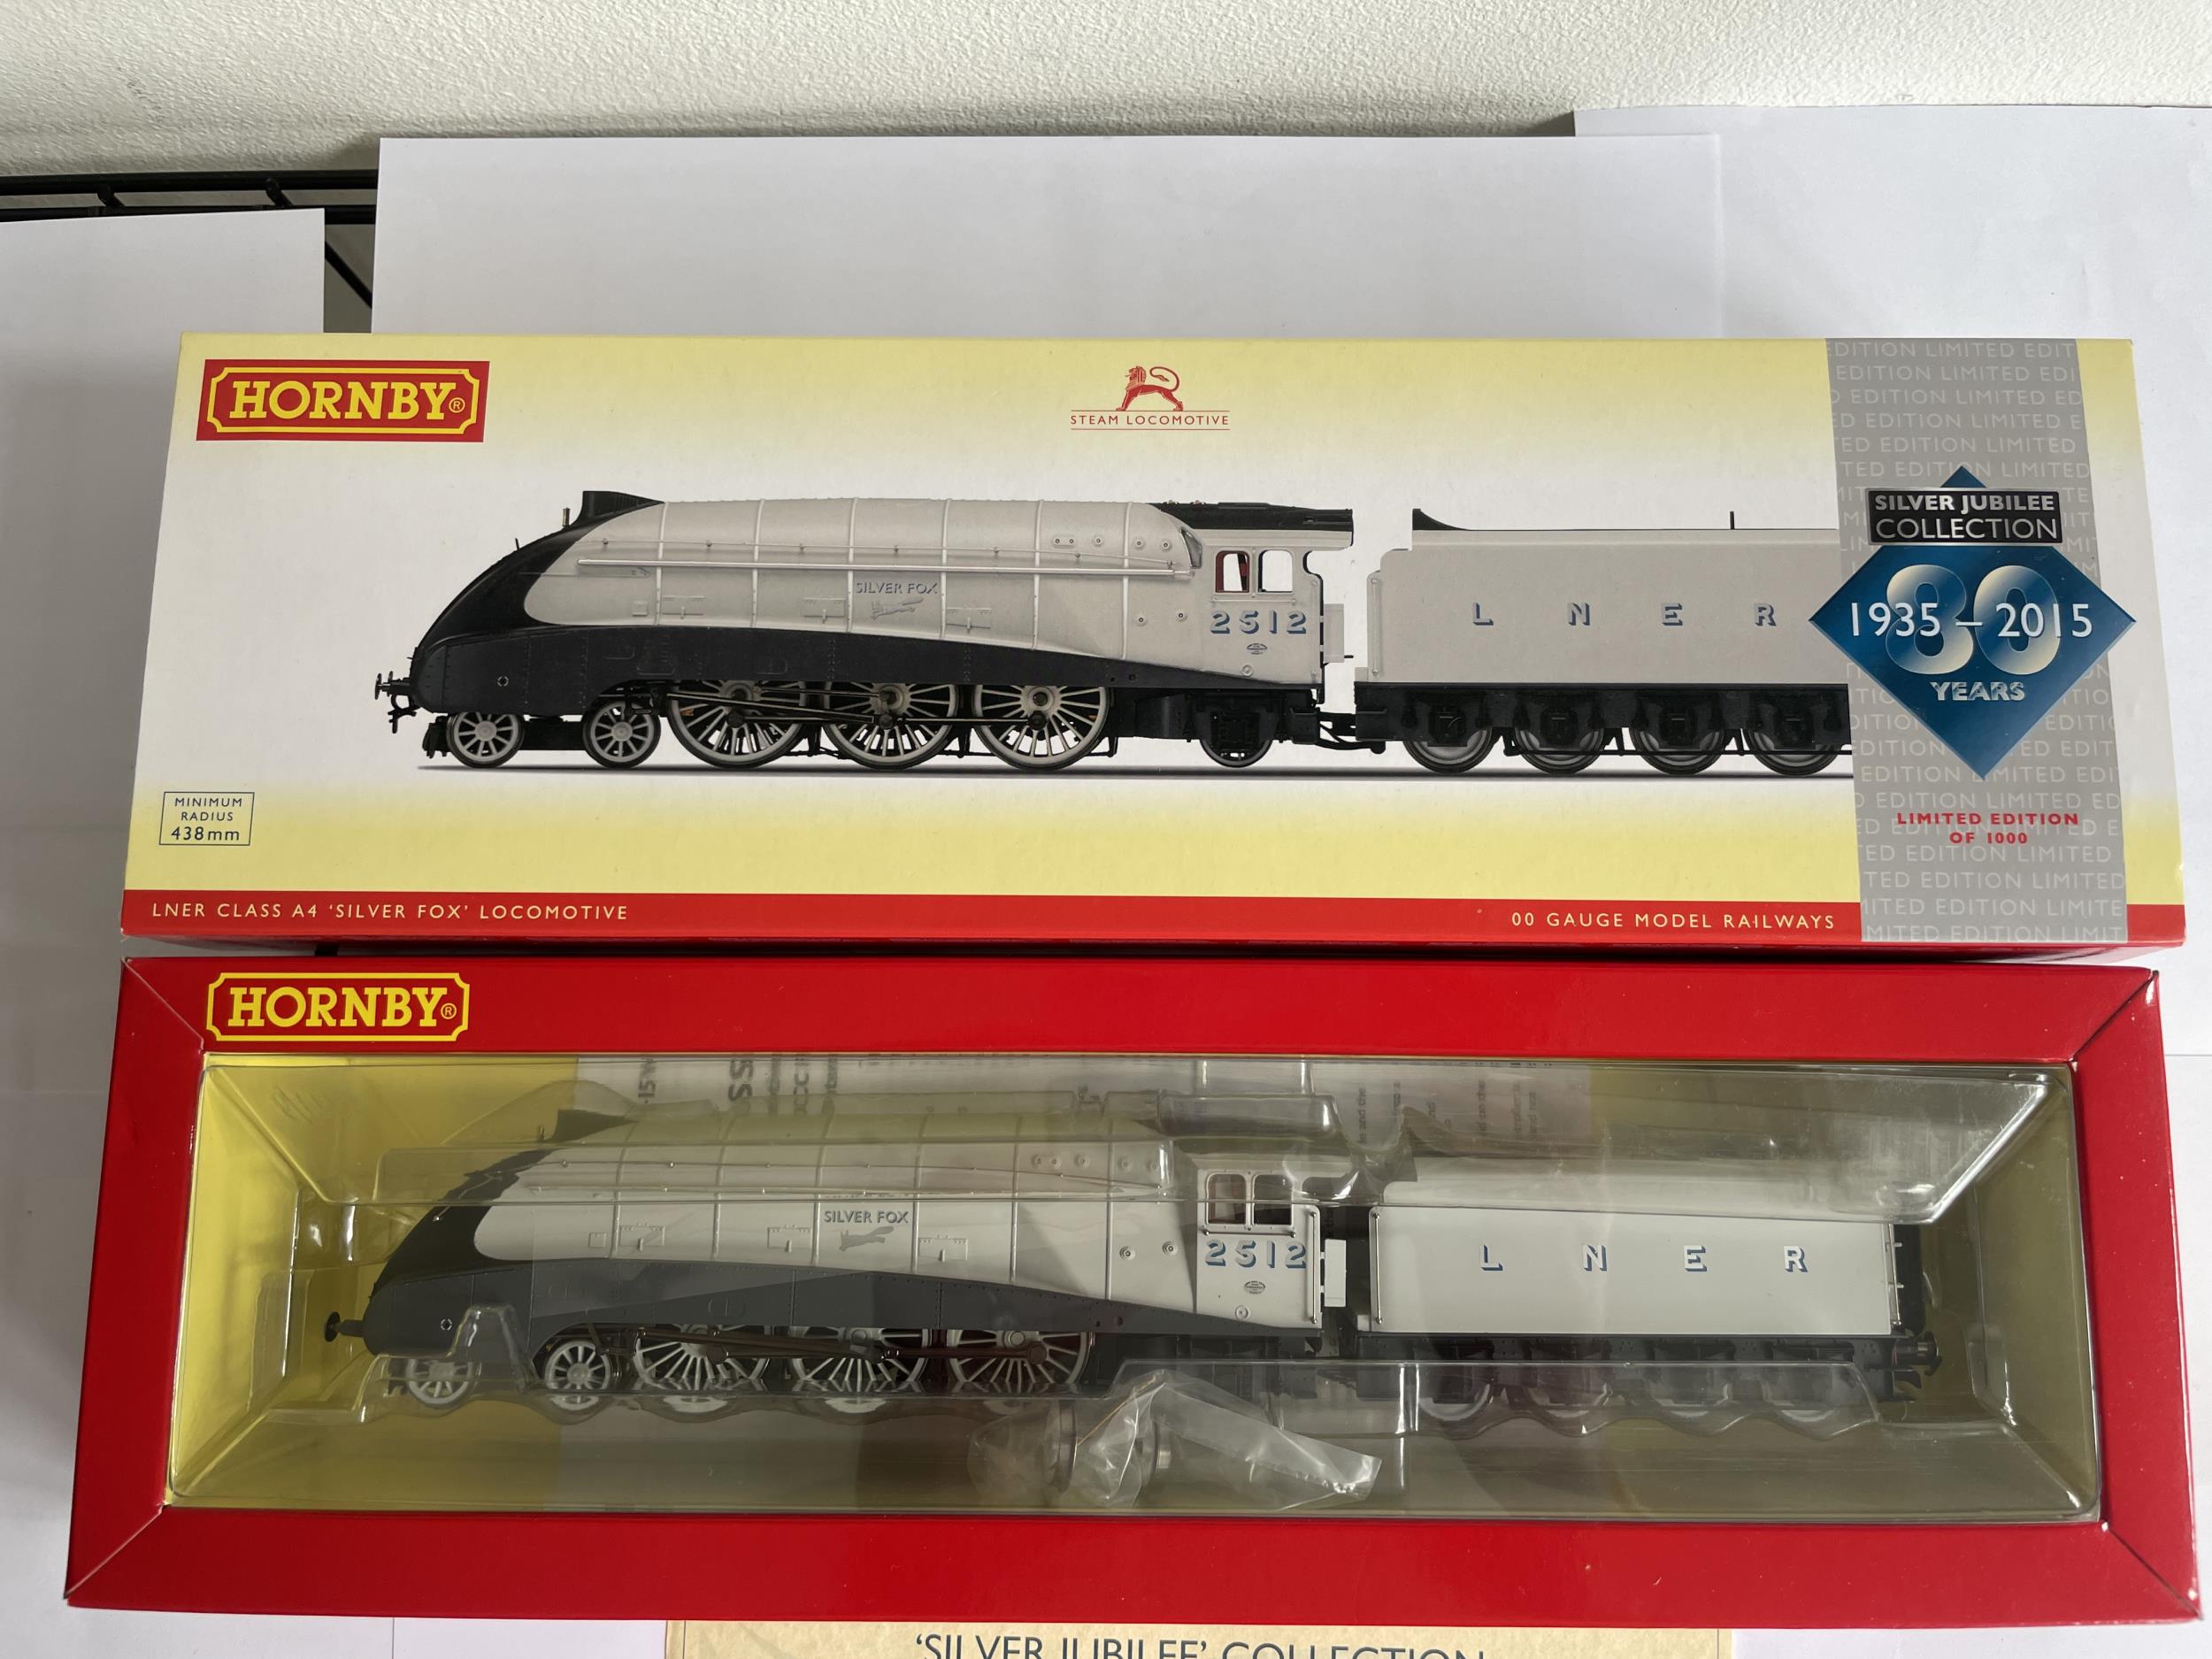 A BOXED HORNBY 00 GAUGE LIMITED EDITION OF 1000 SILVER JUBILEE COLLECTION LNER CLASS A4 SILVER FOX - Bild 2 aus 4